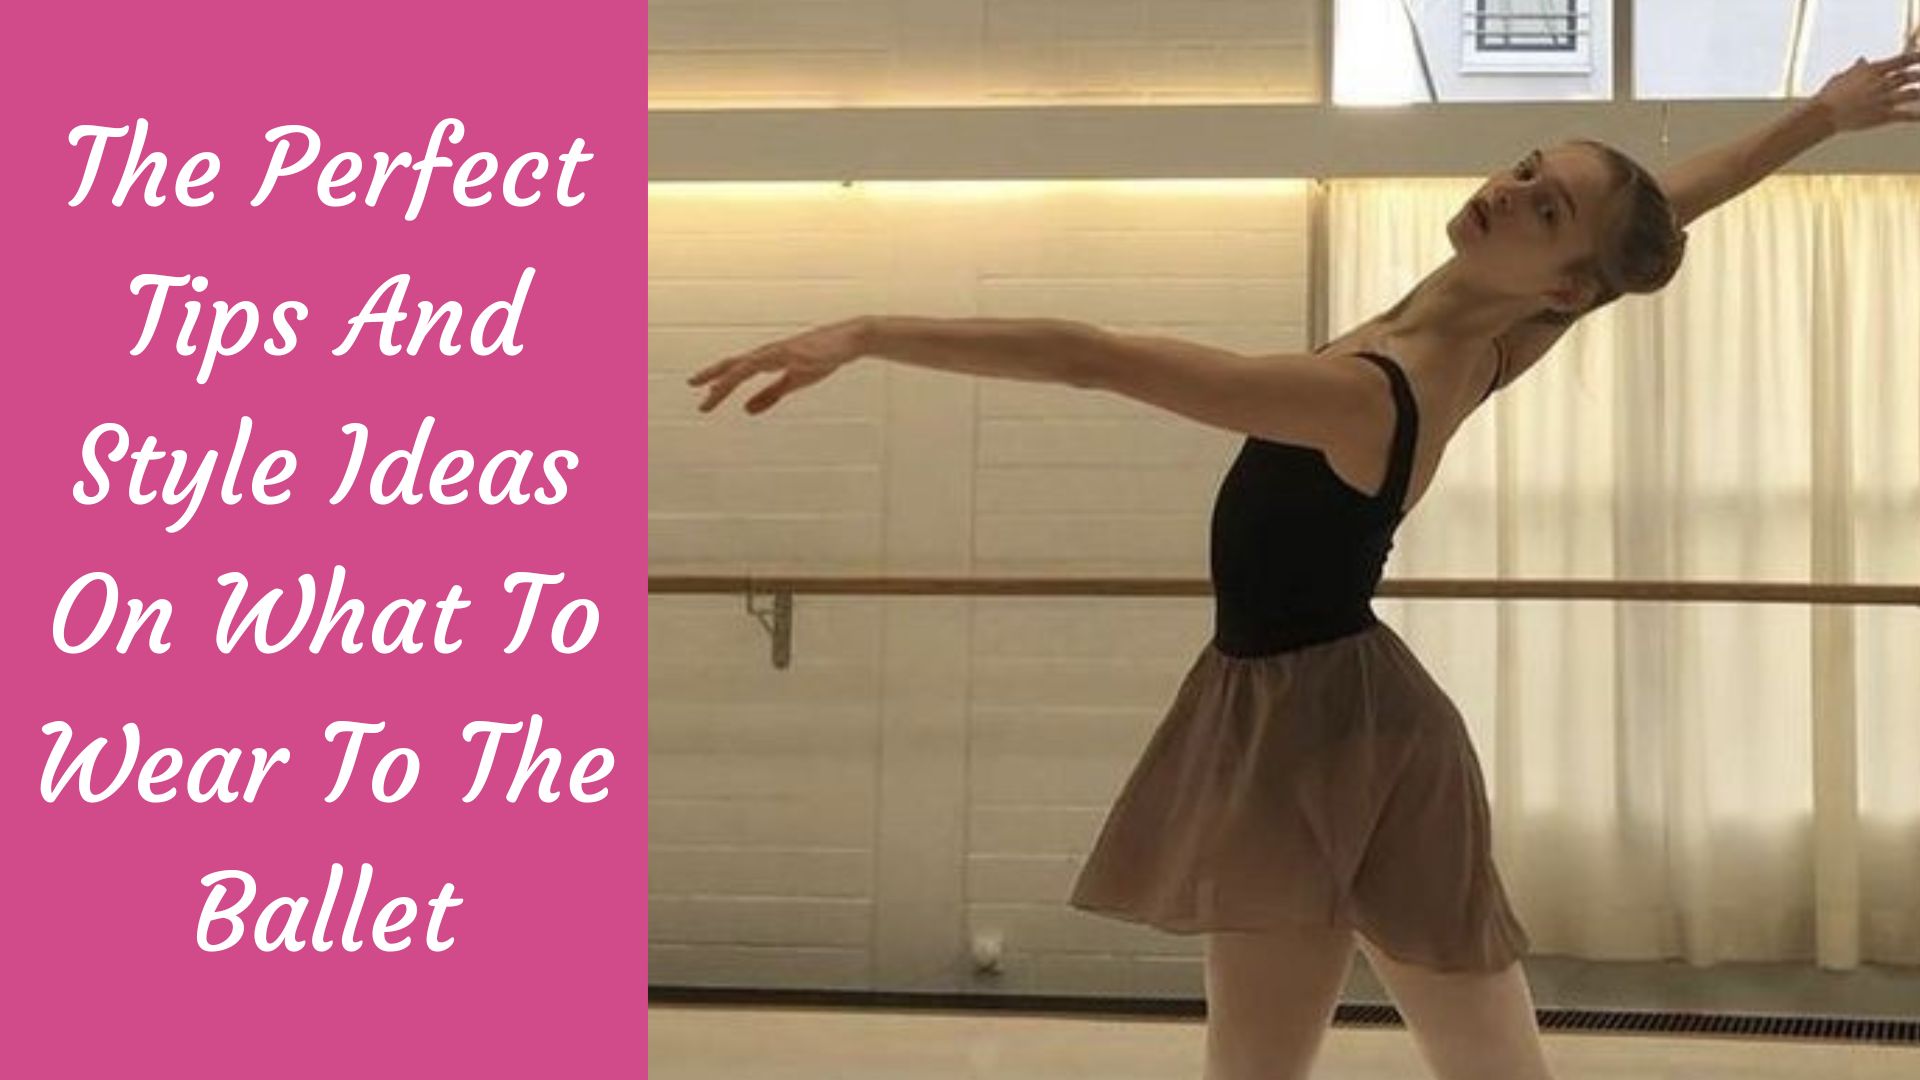 The Perfect Tips And Style Ideas On What To Wear To The Ballet